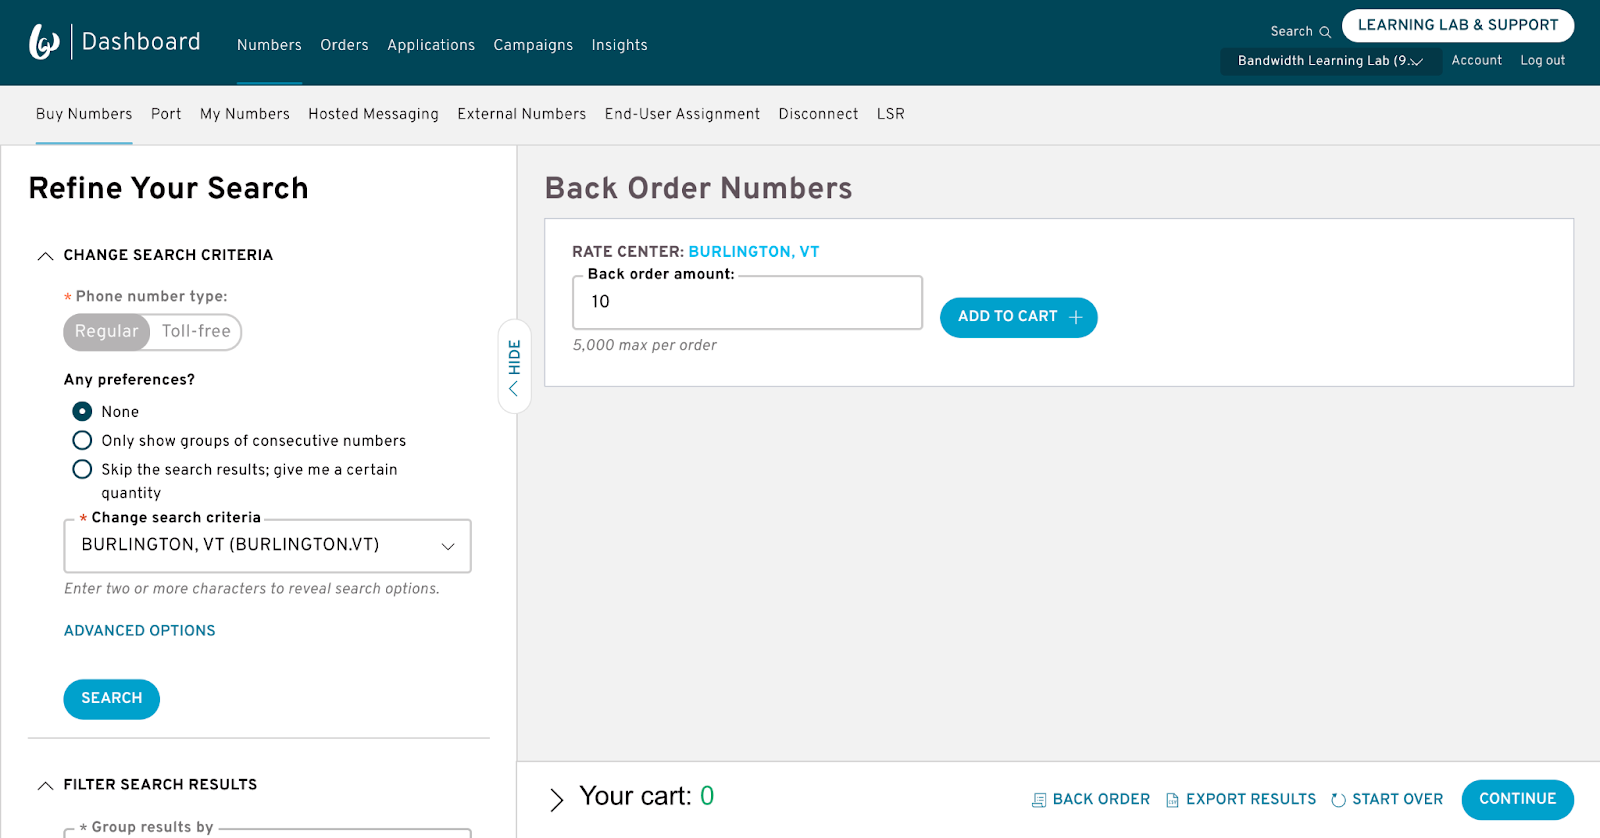 Back Order Numbers page